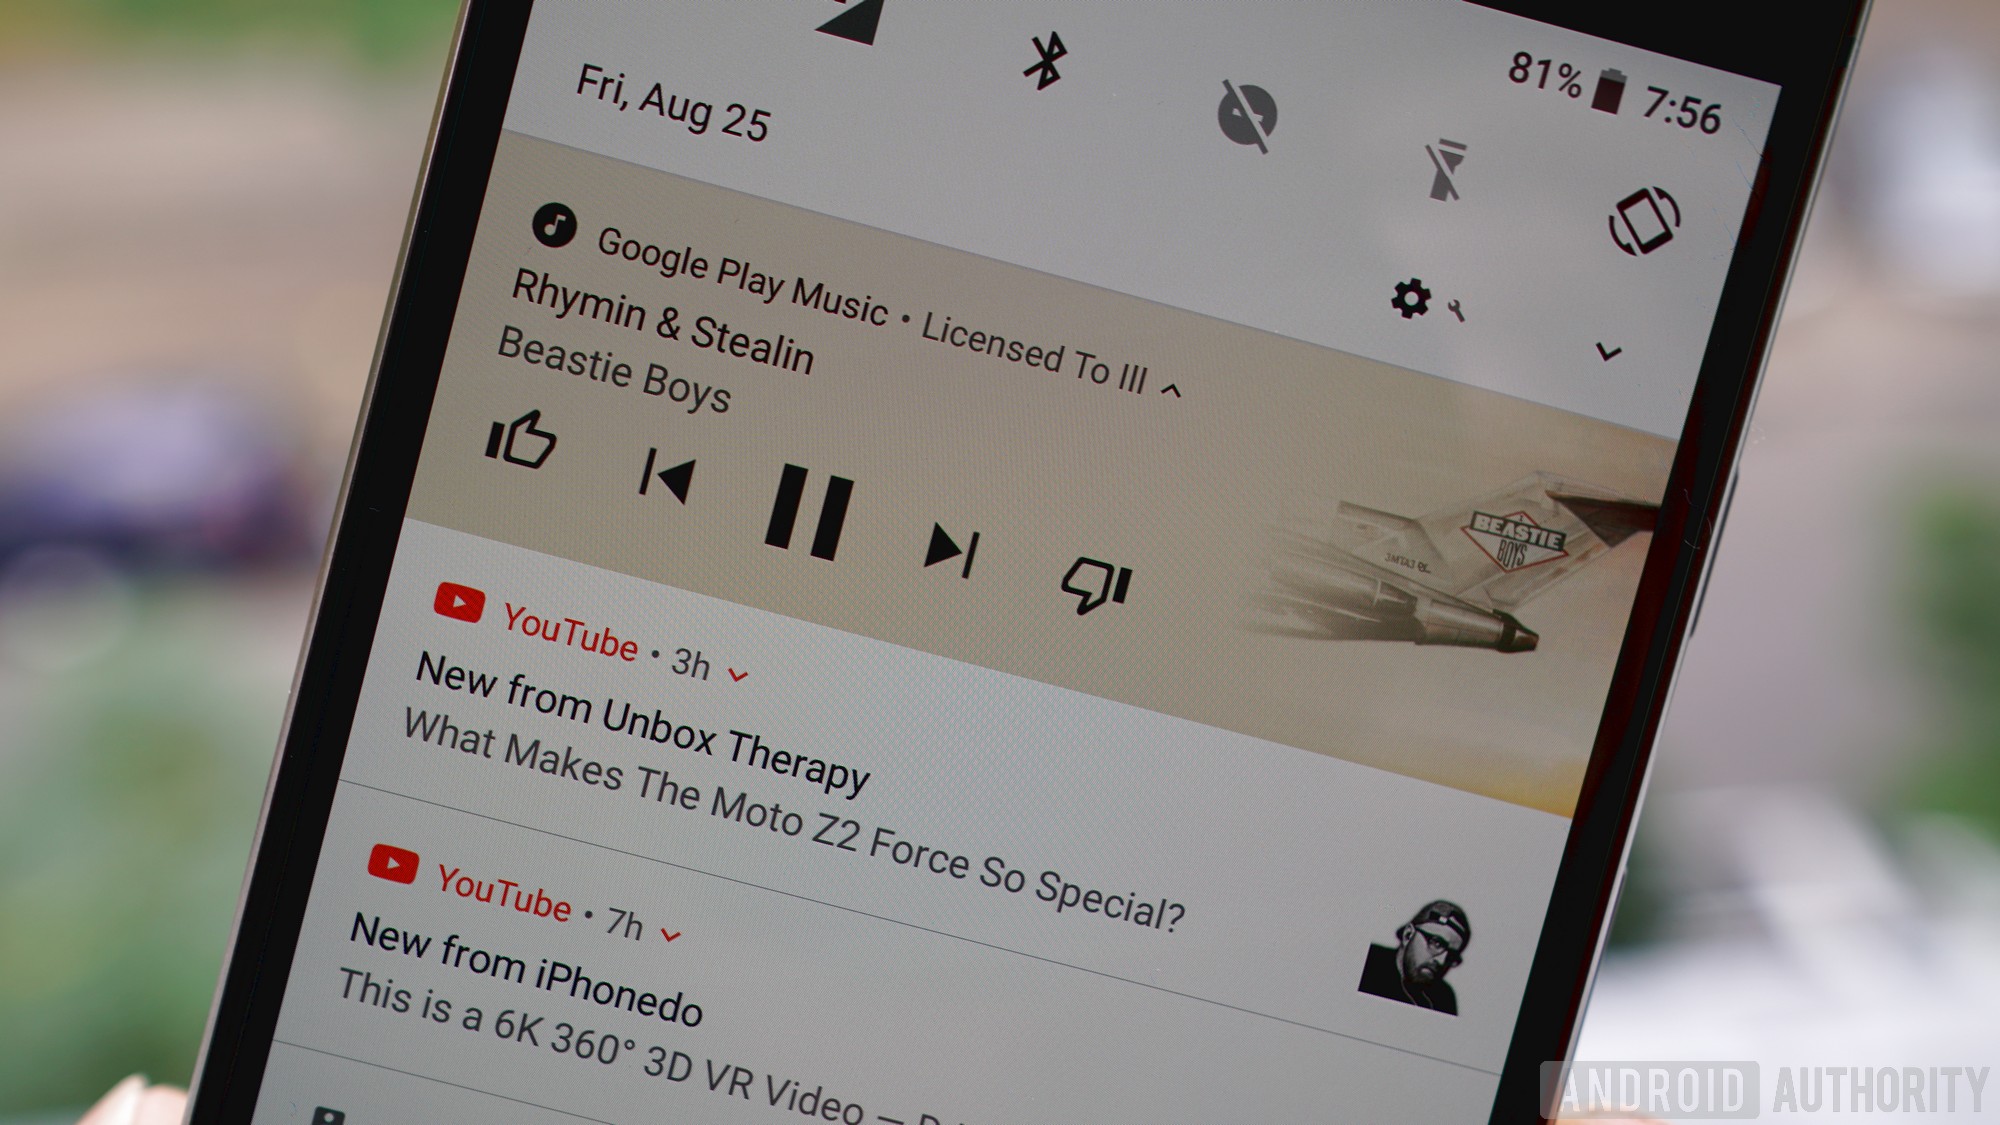 google play music media notification android 8.0 oreo review 7